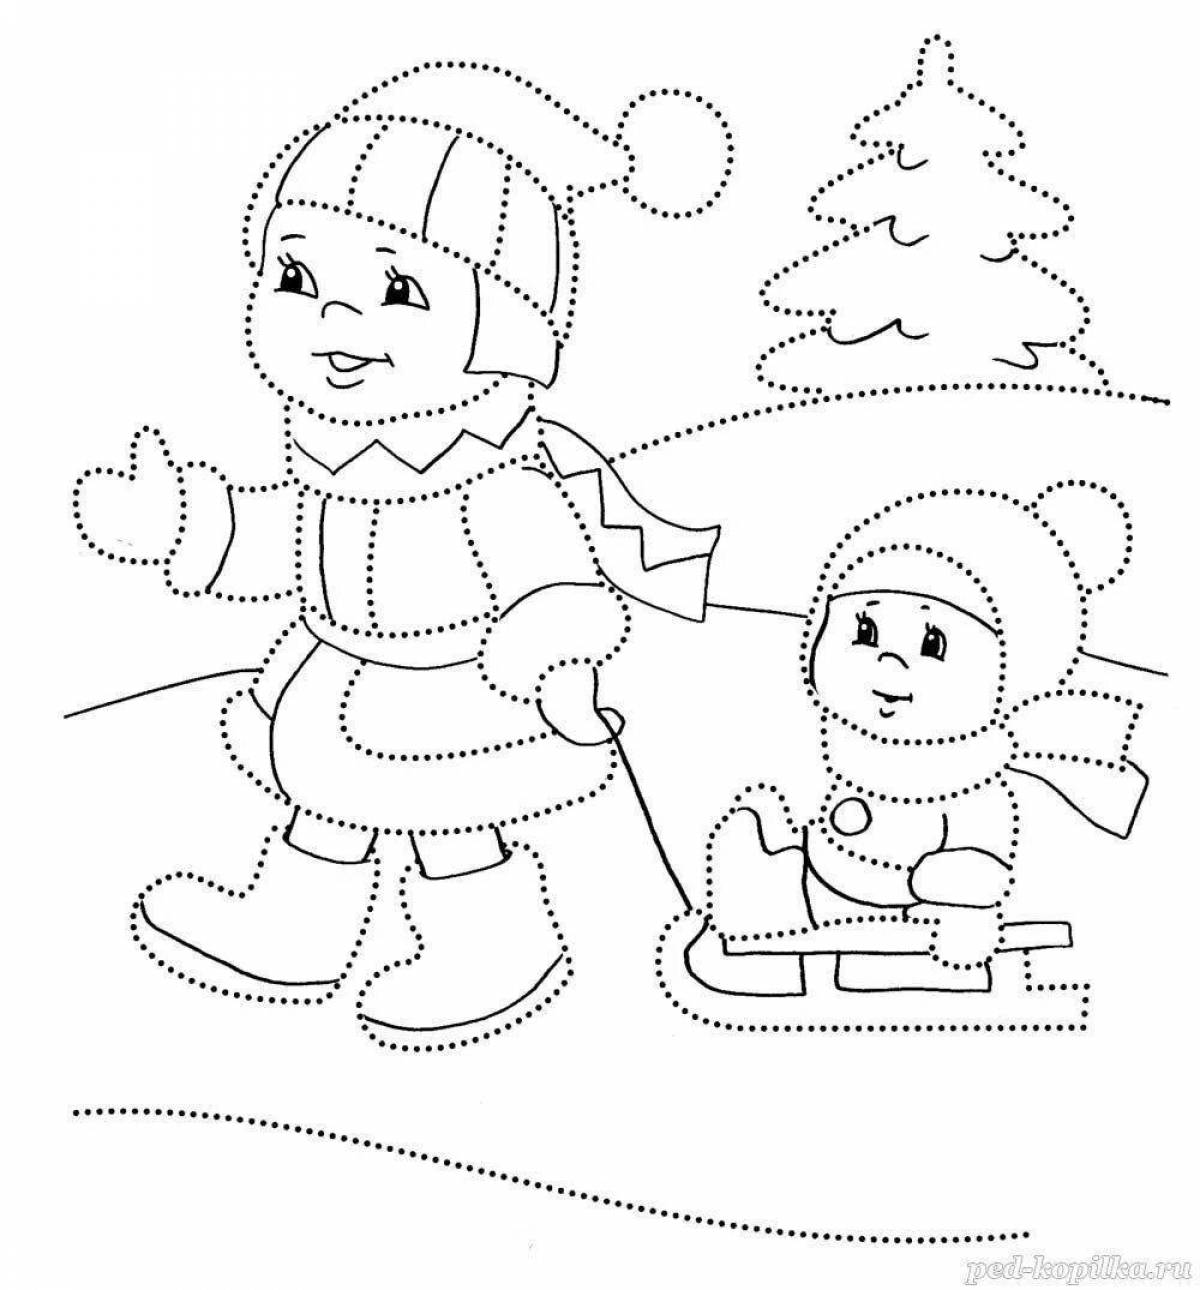 Amazing winter coloring book for kids 6-7 years old